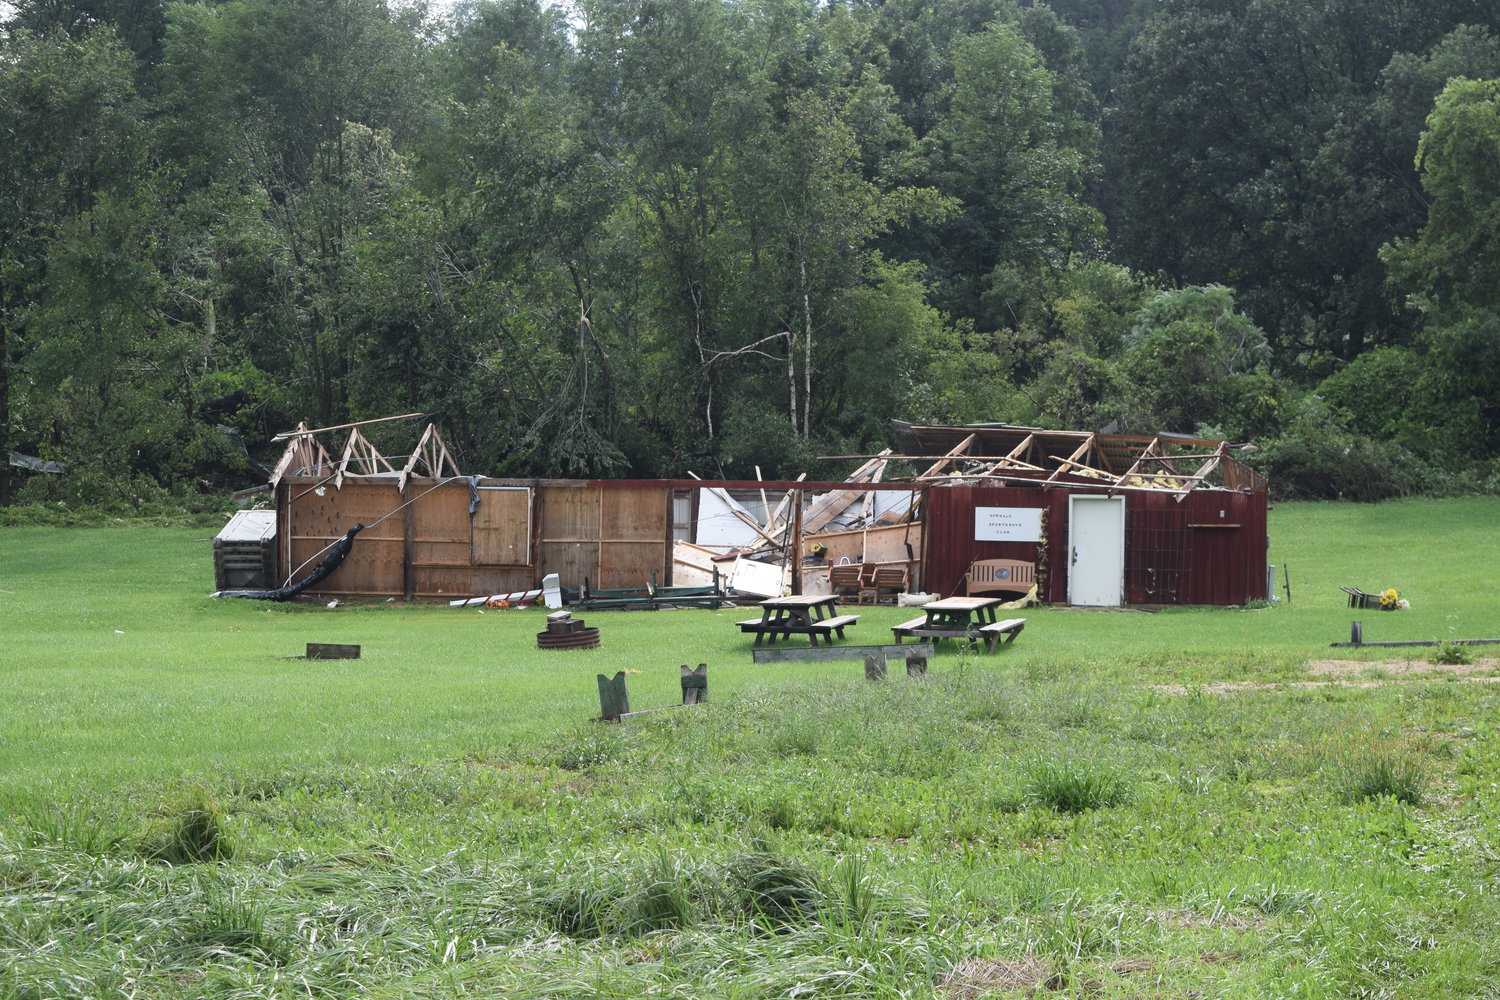  The funnel cloud, which left an 80-foot path and had wind speeds of 105 mph, damaged the nearby Norwalk Rod & Gun Club building.